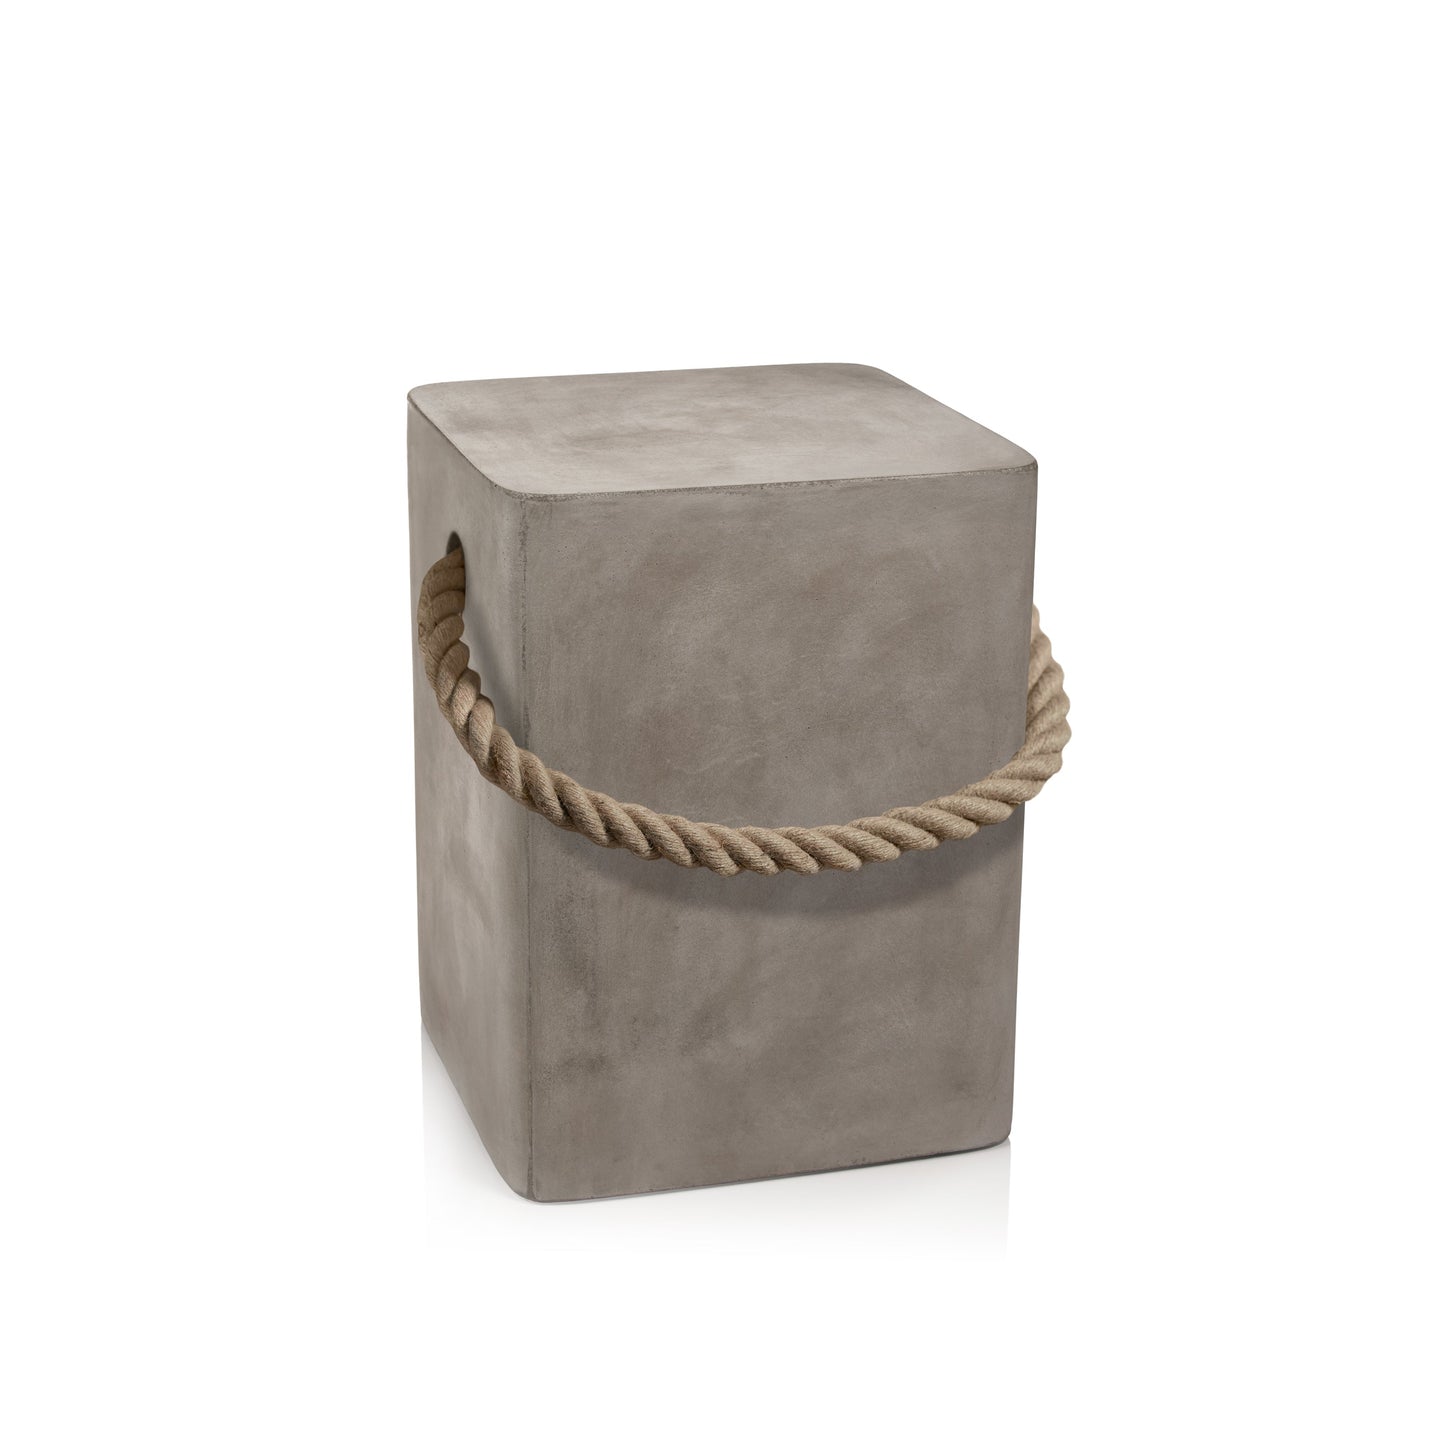 Isola Concrete Stool with Rope Handle